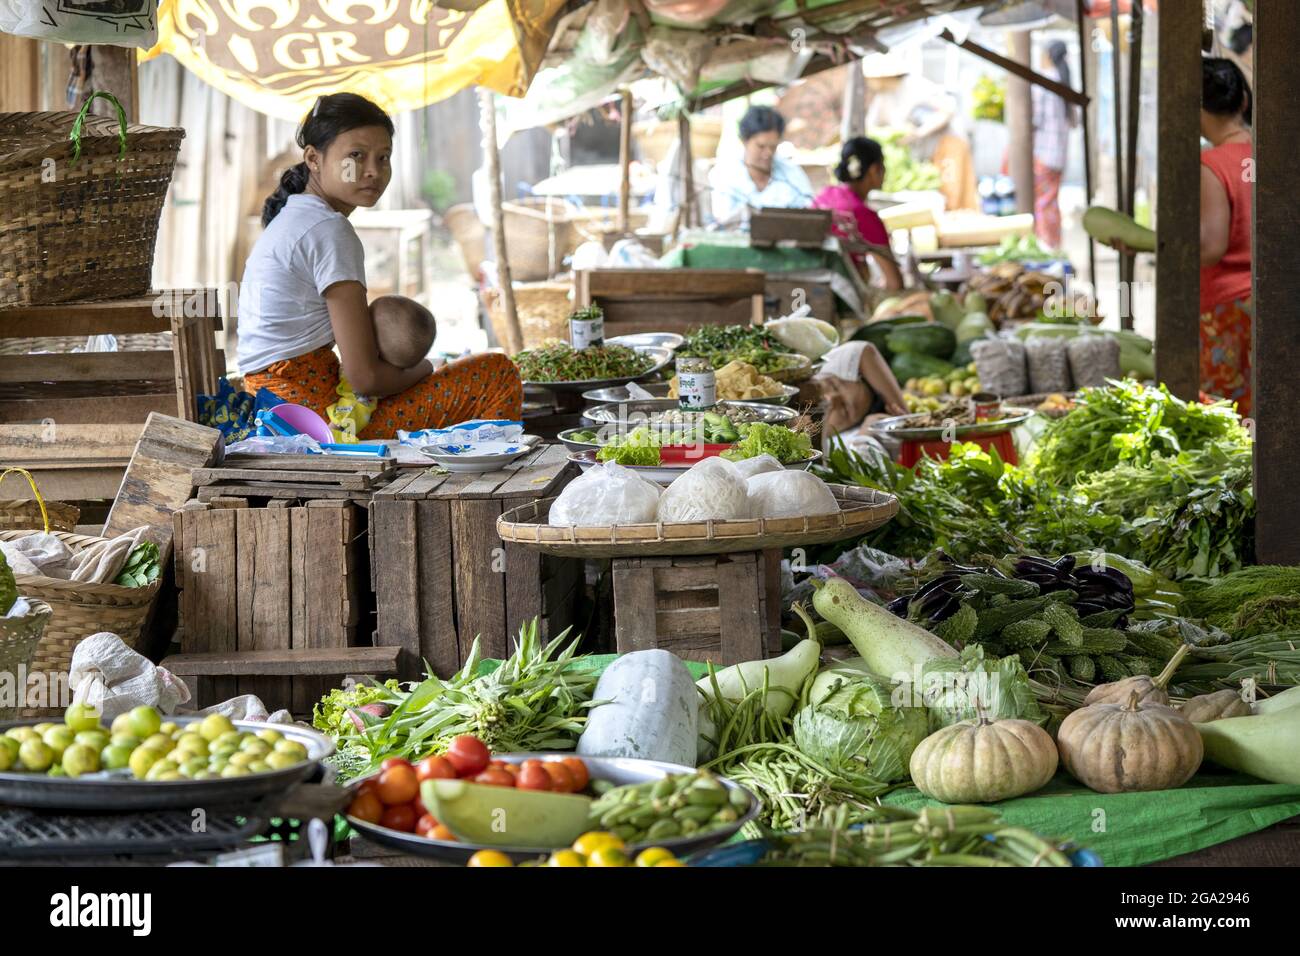 Local woman selling vegetables in the food market of a rural Village in Kachin state on the Irrawaddy River, Myanmar/Burma; Kachin, Myanmar Stock Photo